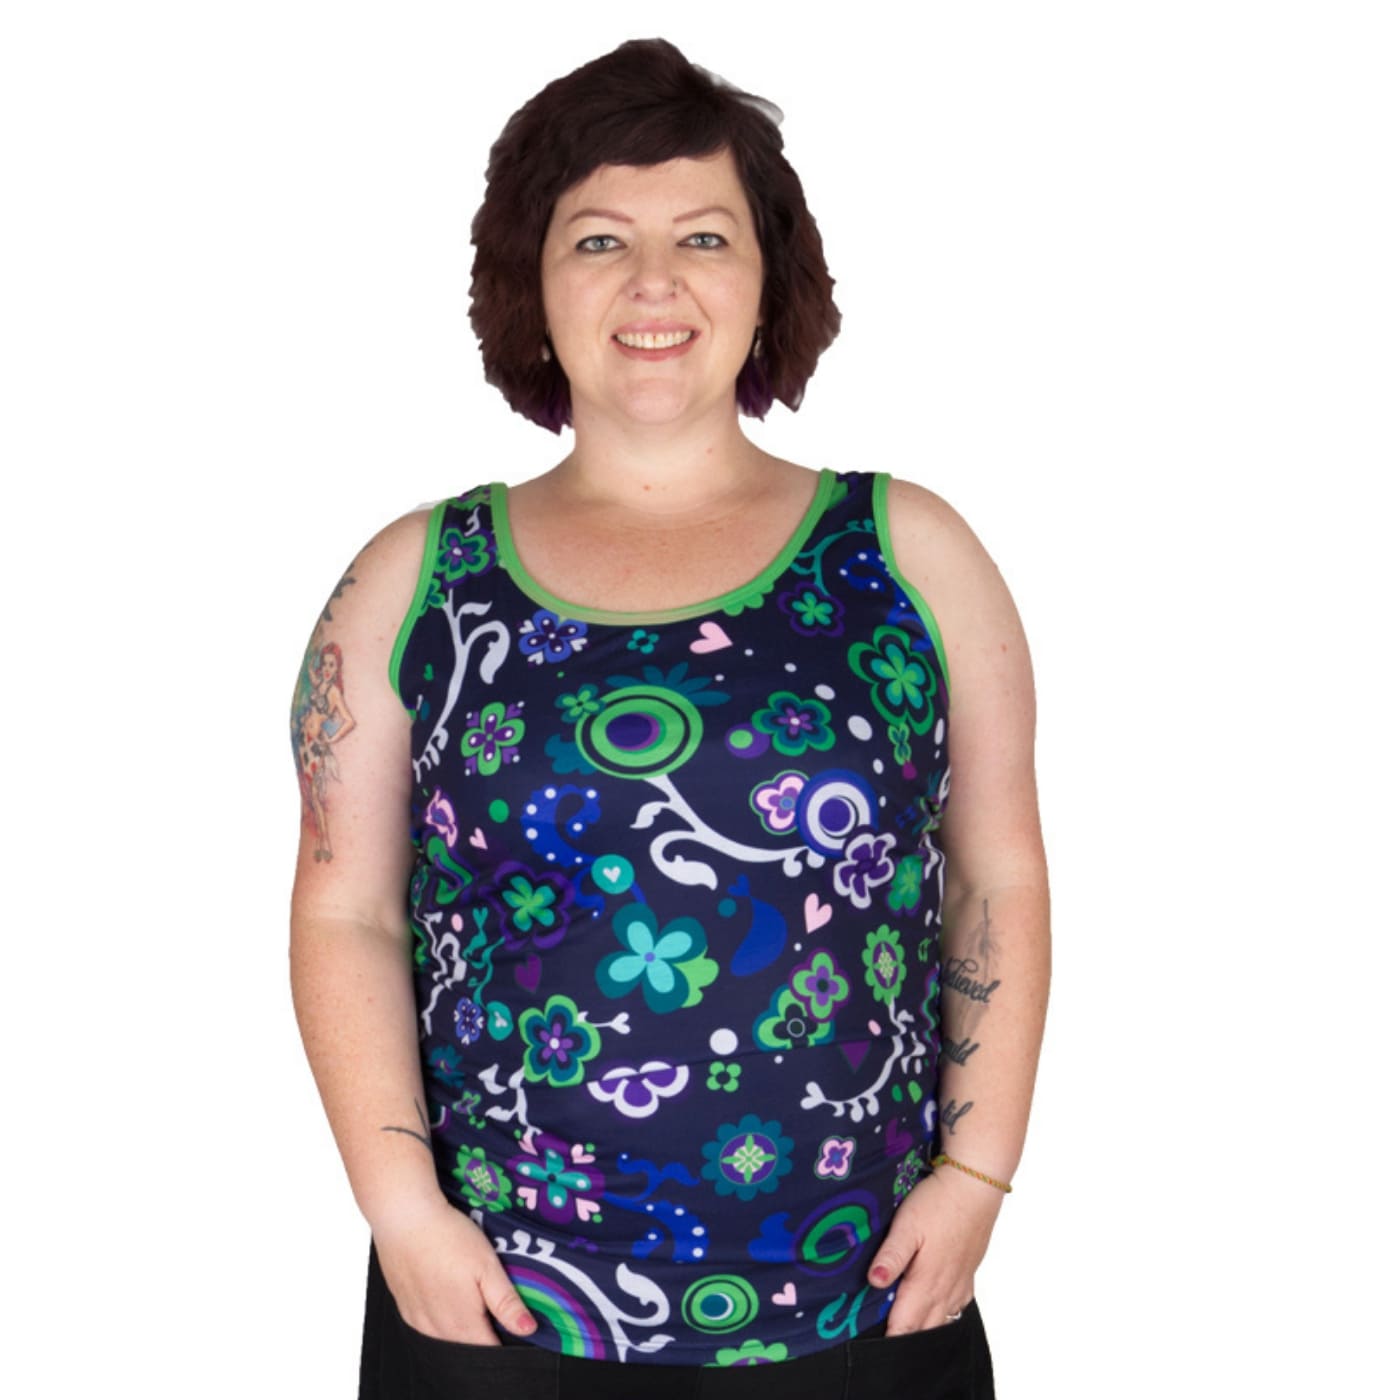 Groovy Enchantment Singlet Top by RainbowsAndFairies.com.au (Psychedelic - Woodstock - Green & Purple - Vintage Inspired - Kitsch - Abstract - Tank Top) - SKU: CL_SGLET_GROOV_ENT - Pic-03